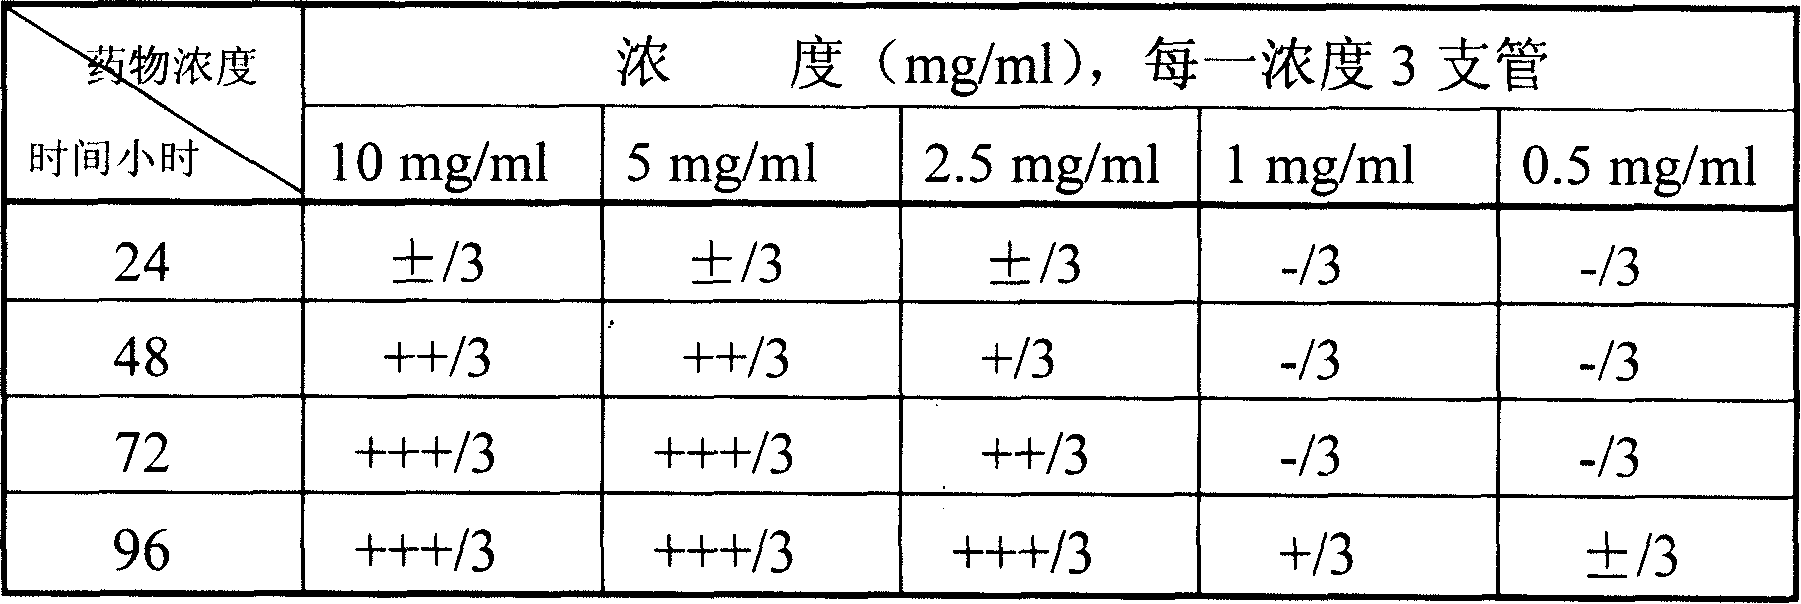 Composition of starwort sulphonic acid or vitriolic acid polyoses ester total phenolic glycoside and method of preparing the same and antiviral application